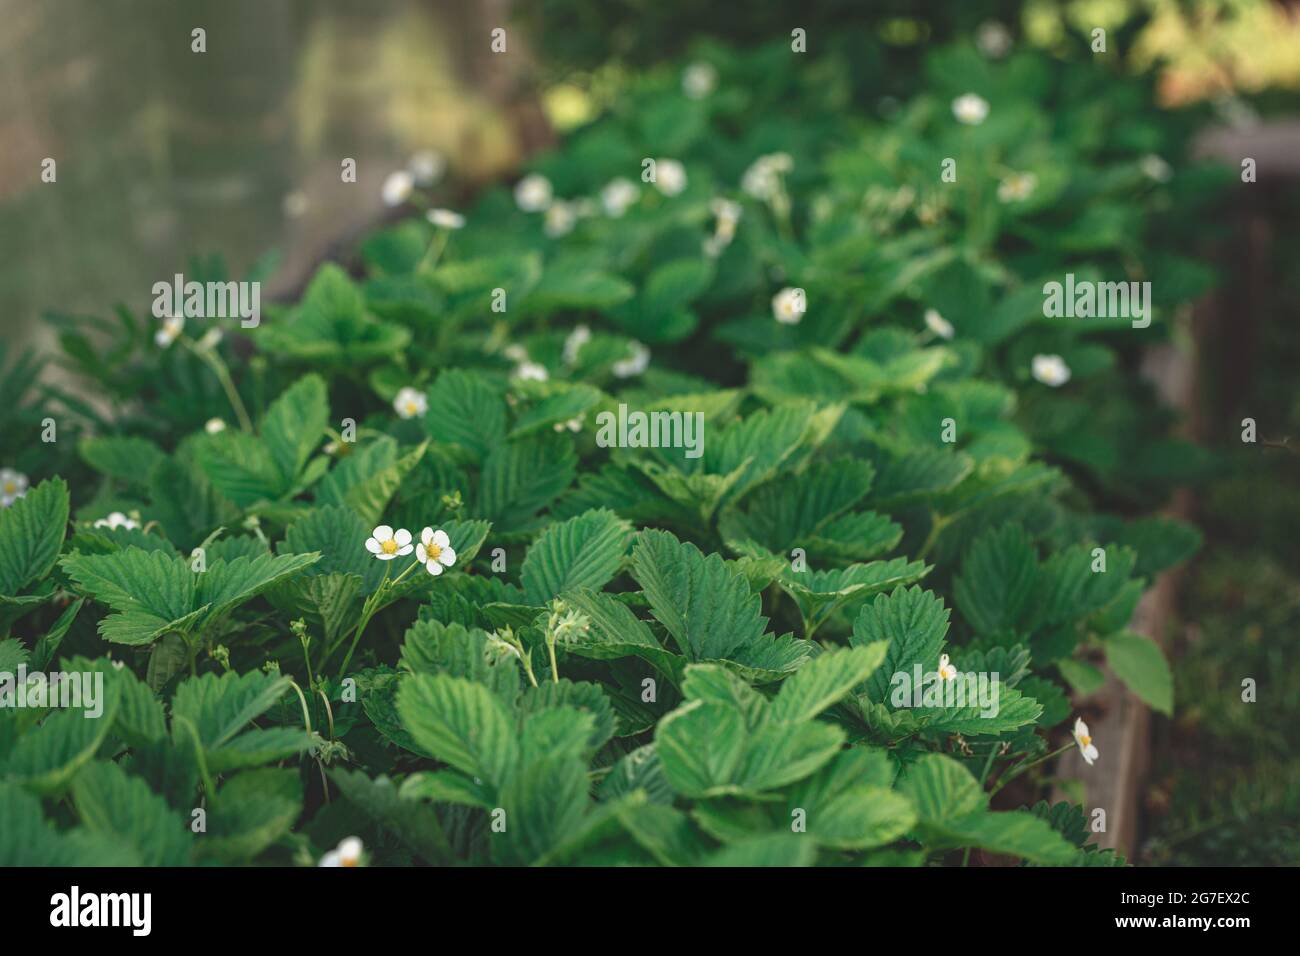 Strawberries blooming with white flowers in the garden bed. Gardening, growing strawberry concept Stock Photo